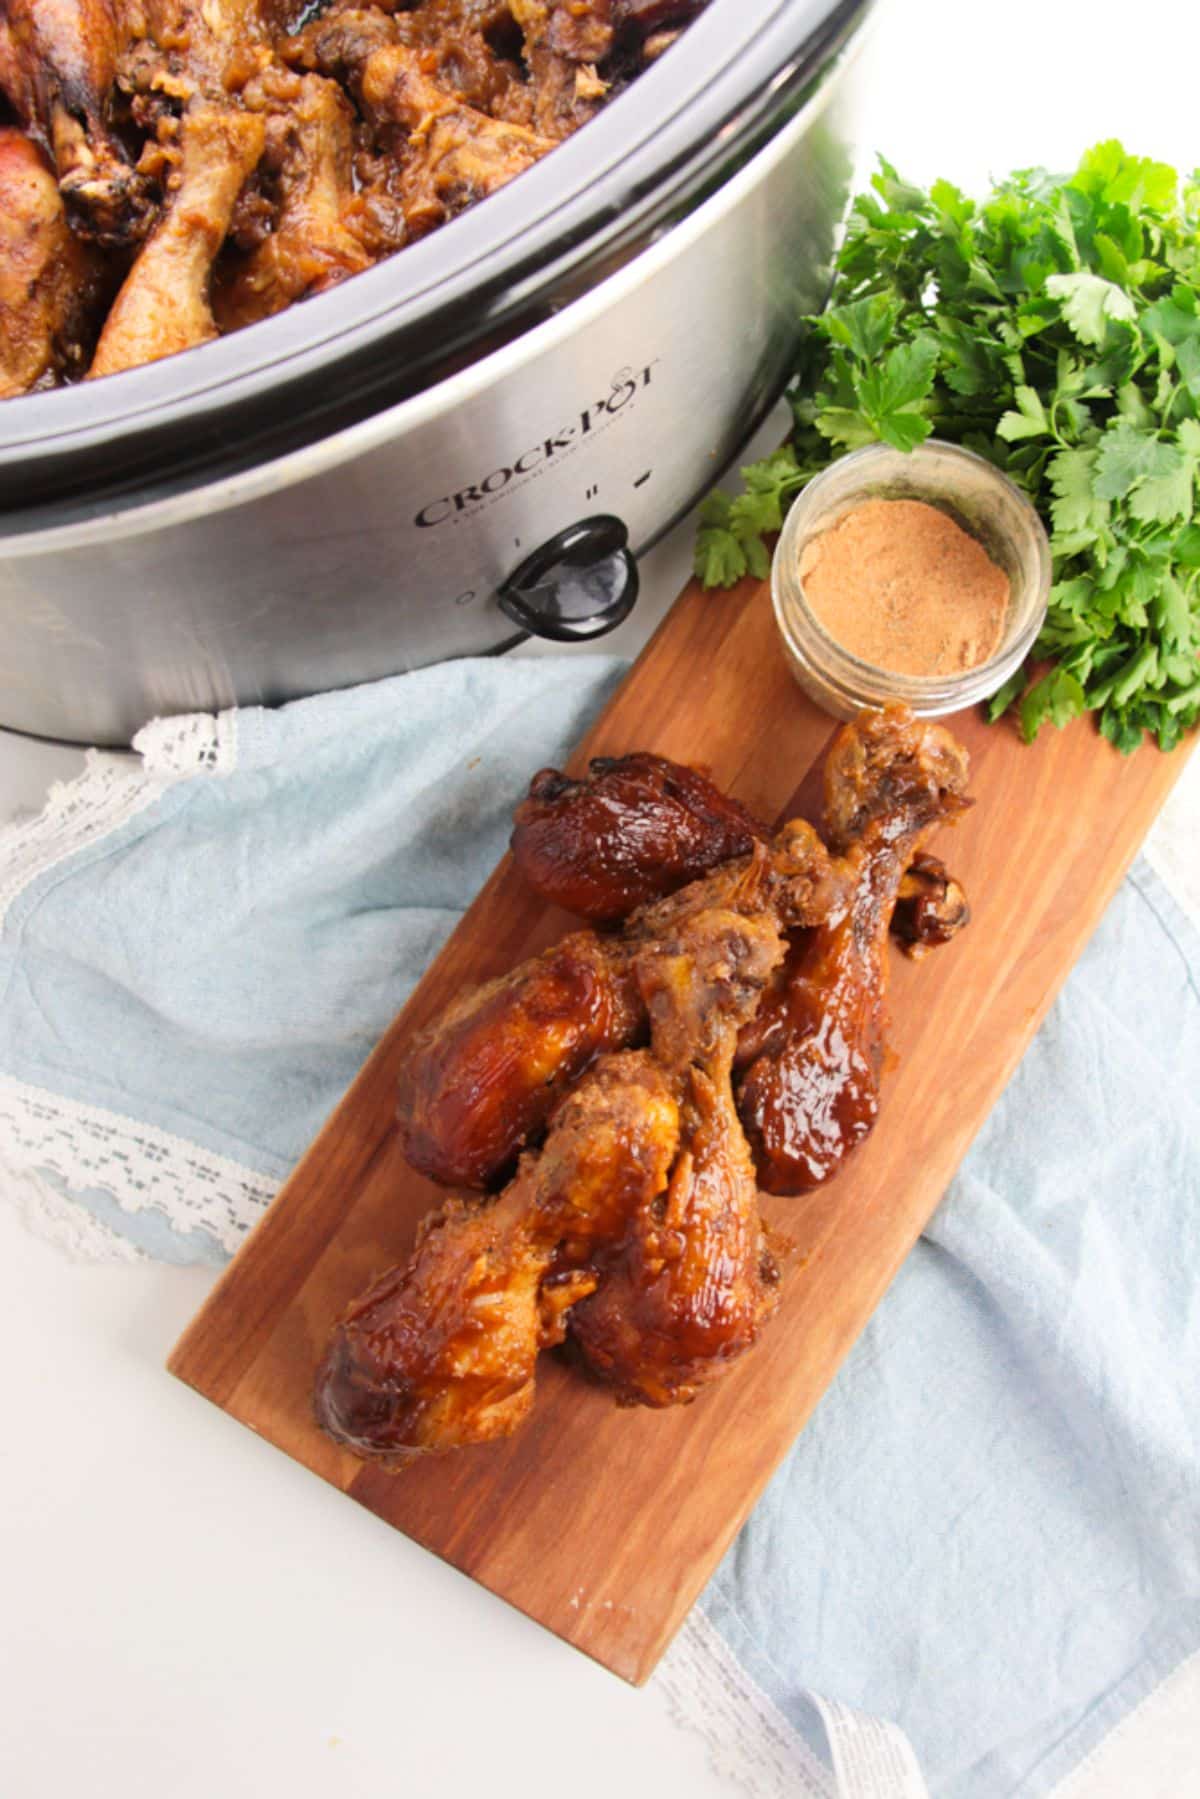 A slow cooker with BBQ chicken legs next to more chicken legs on a cutting board.